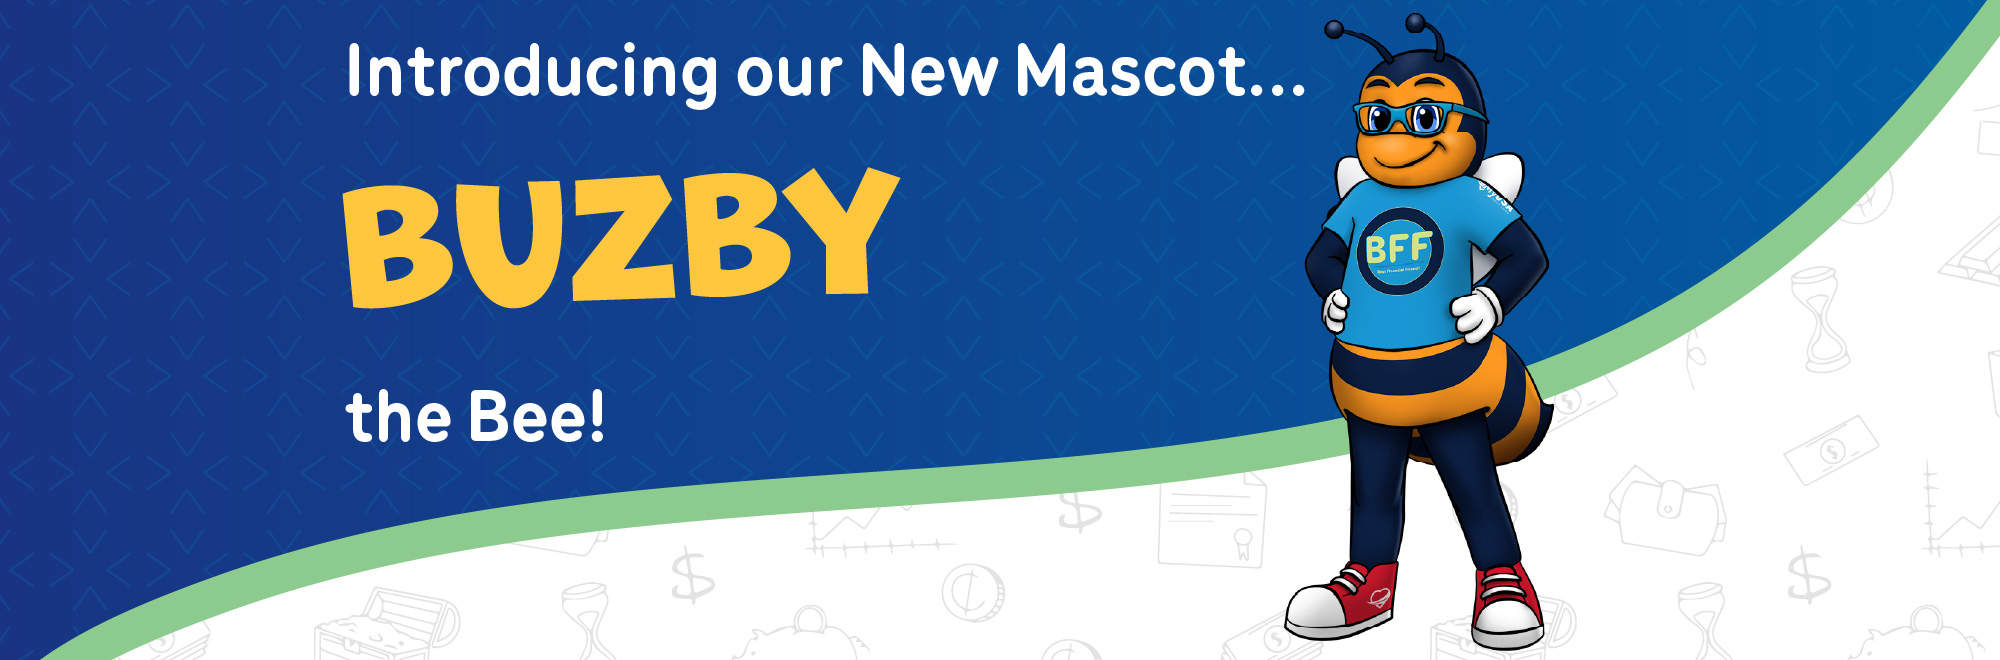 Introducing our New Mascot Buzby the Bee!